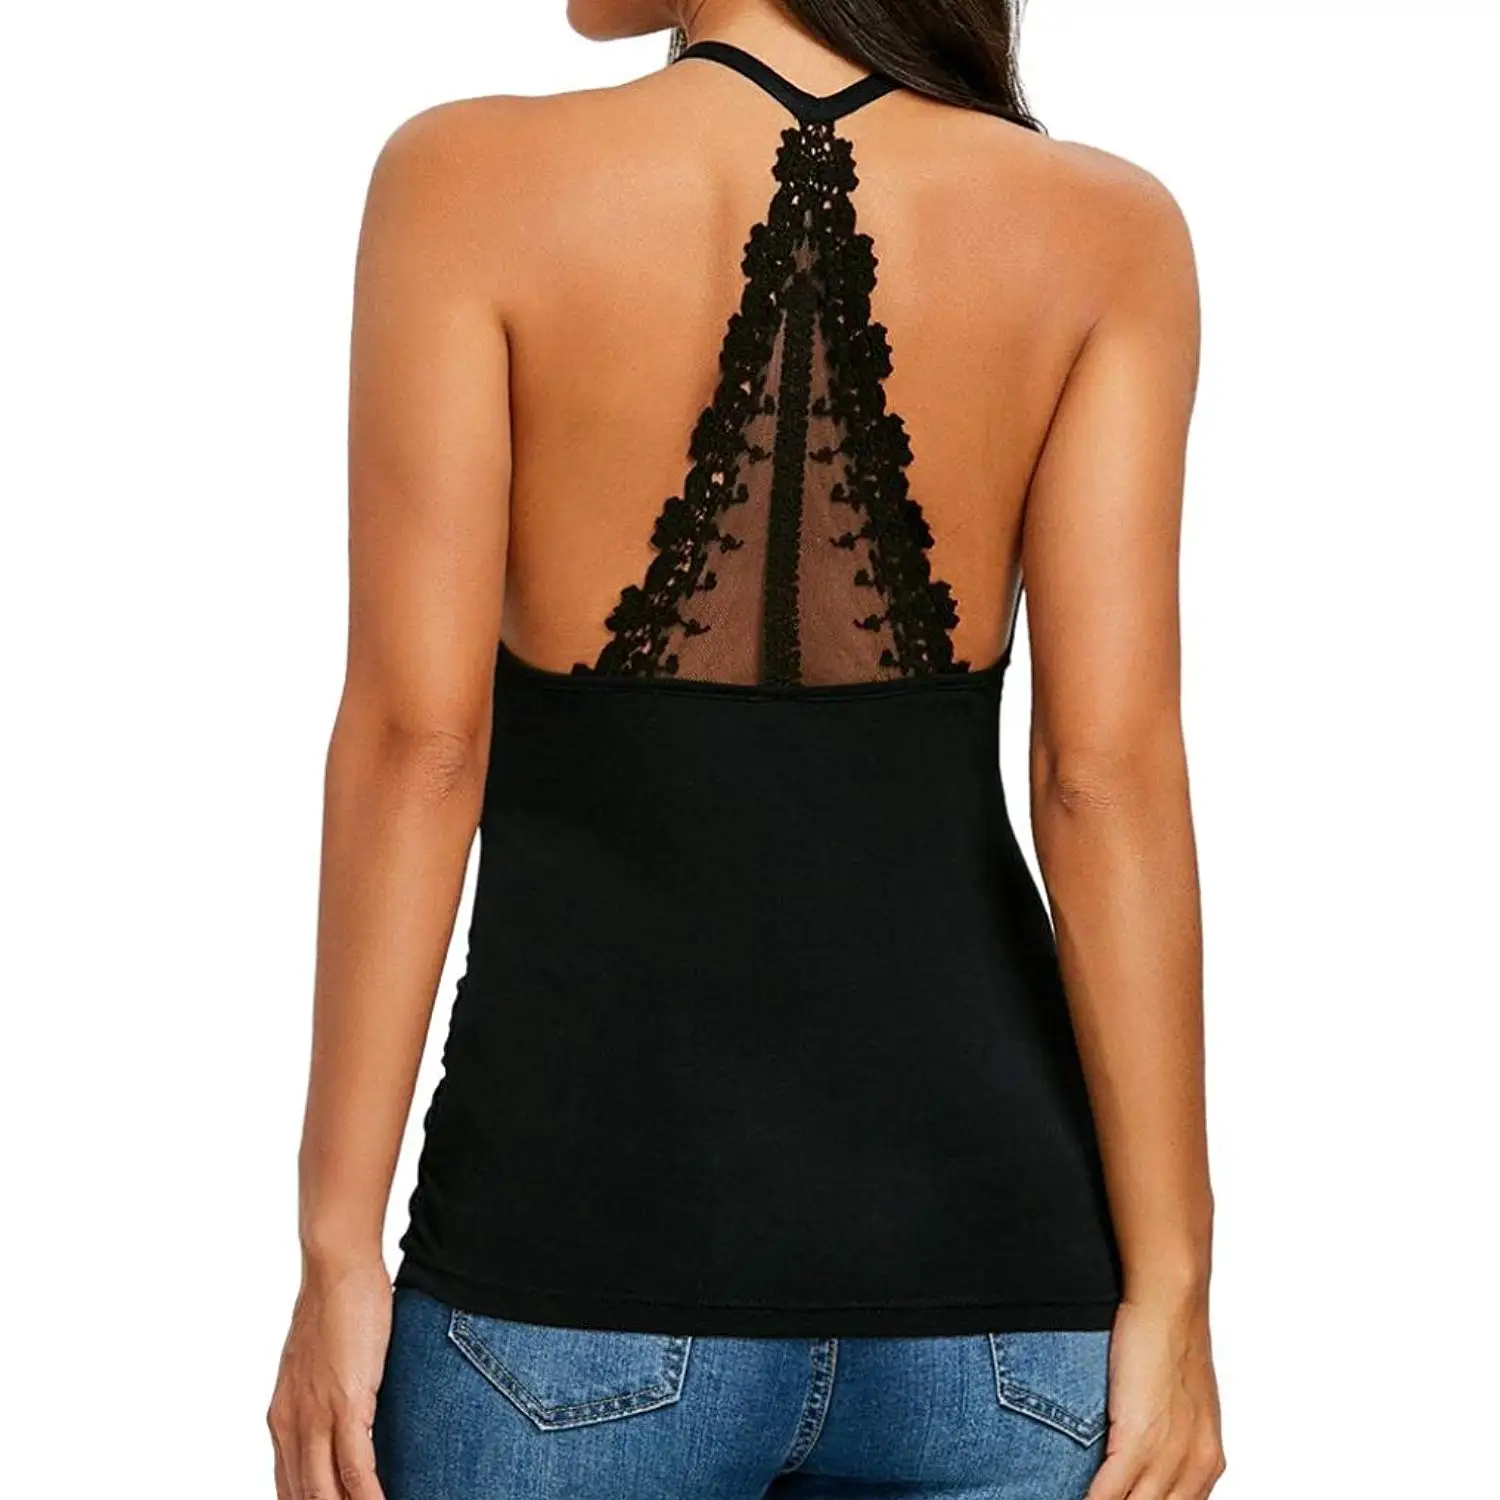 Cheap Lace Dressy Tops, find Lace Dressy Tops deals on line at Alibaba.com